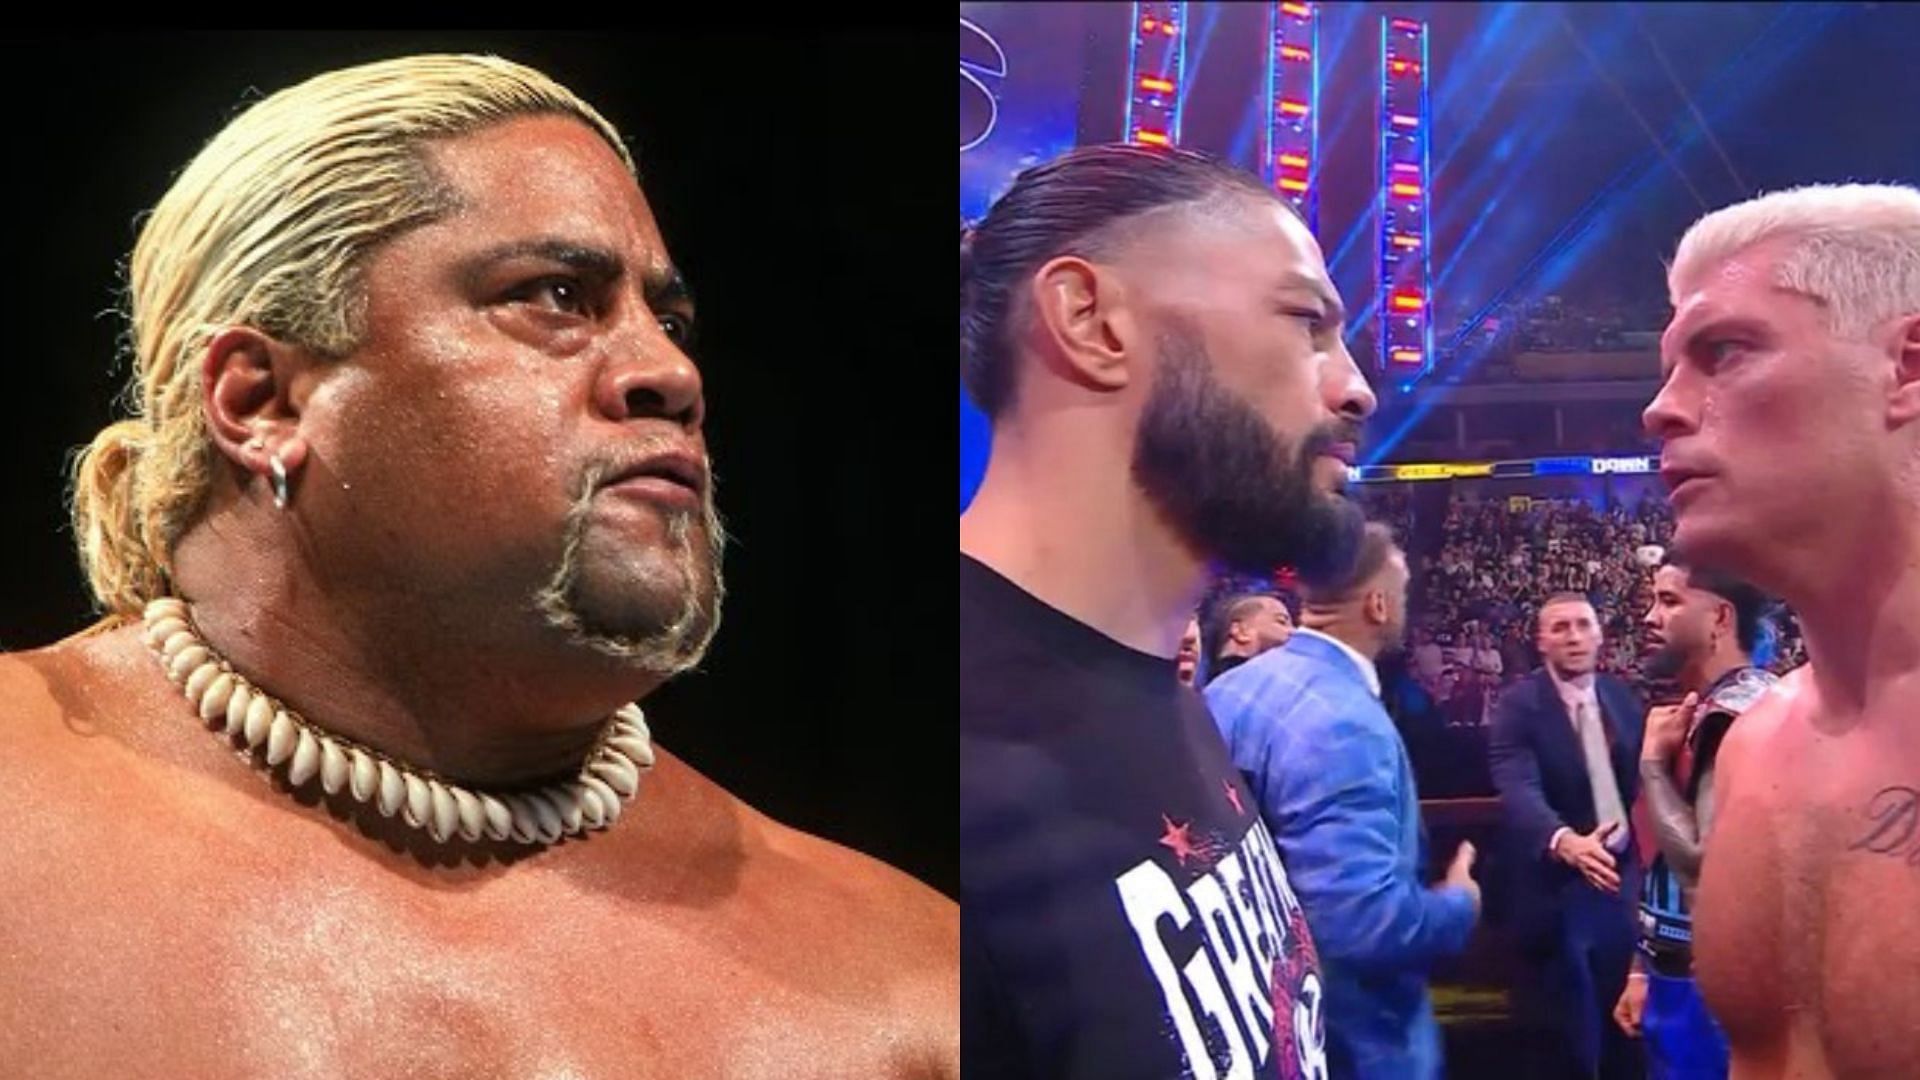 Rikishi has reacted to the big confrontation that occurred on SmackDown